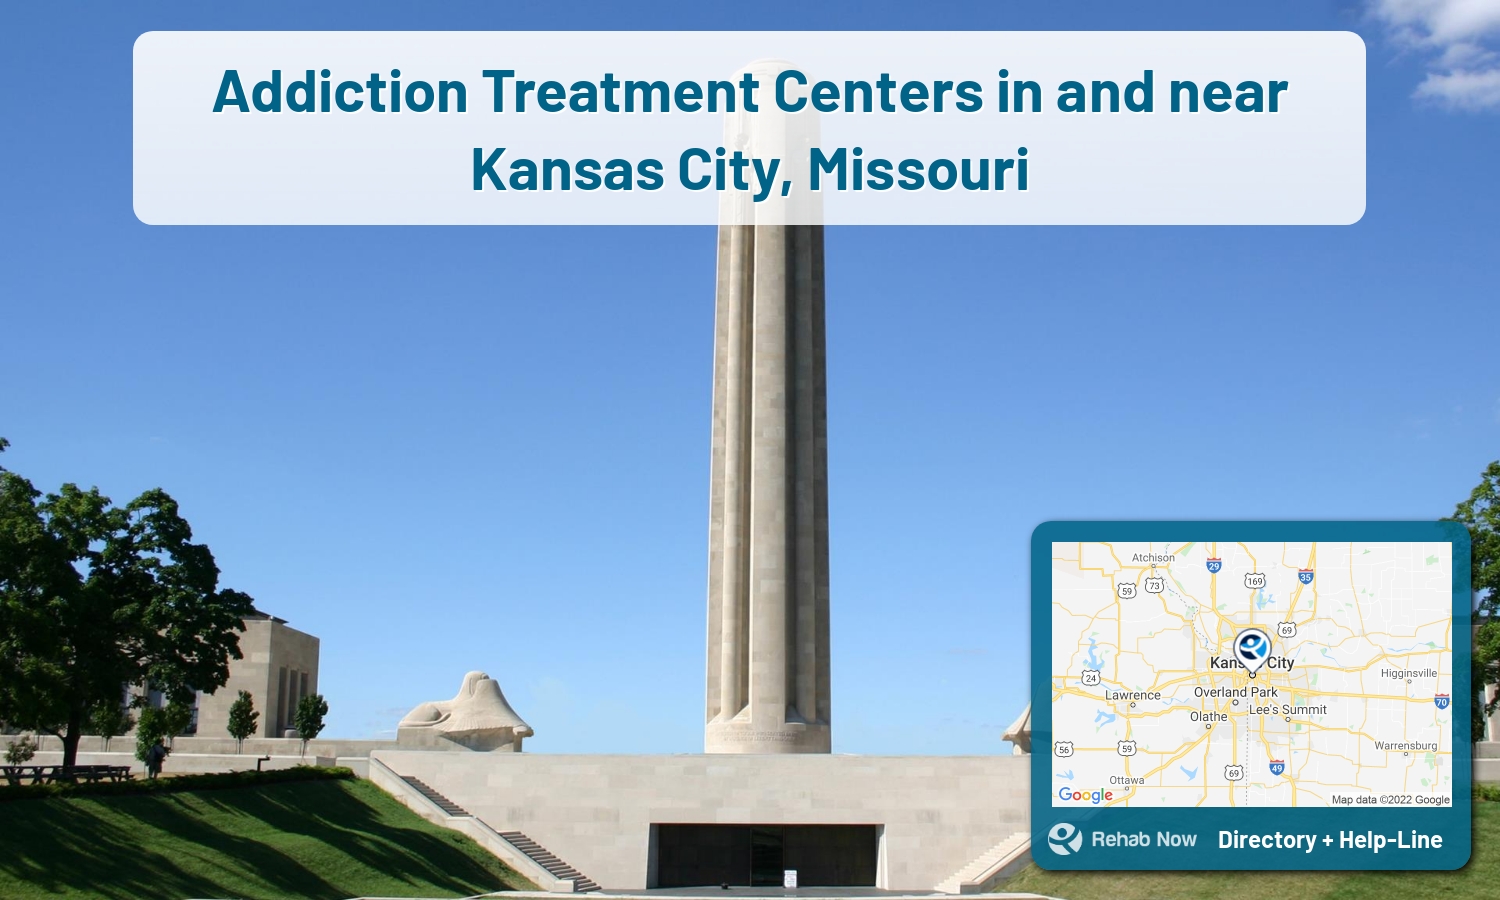 View options, availability, treatment methods, and more, for drug rehab and alcohol treatment in Kansas City, Missouri